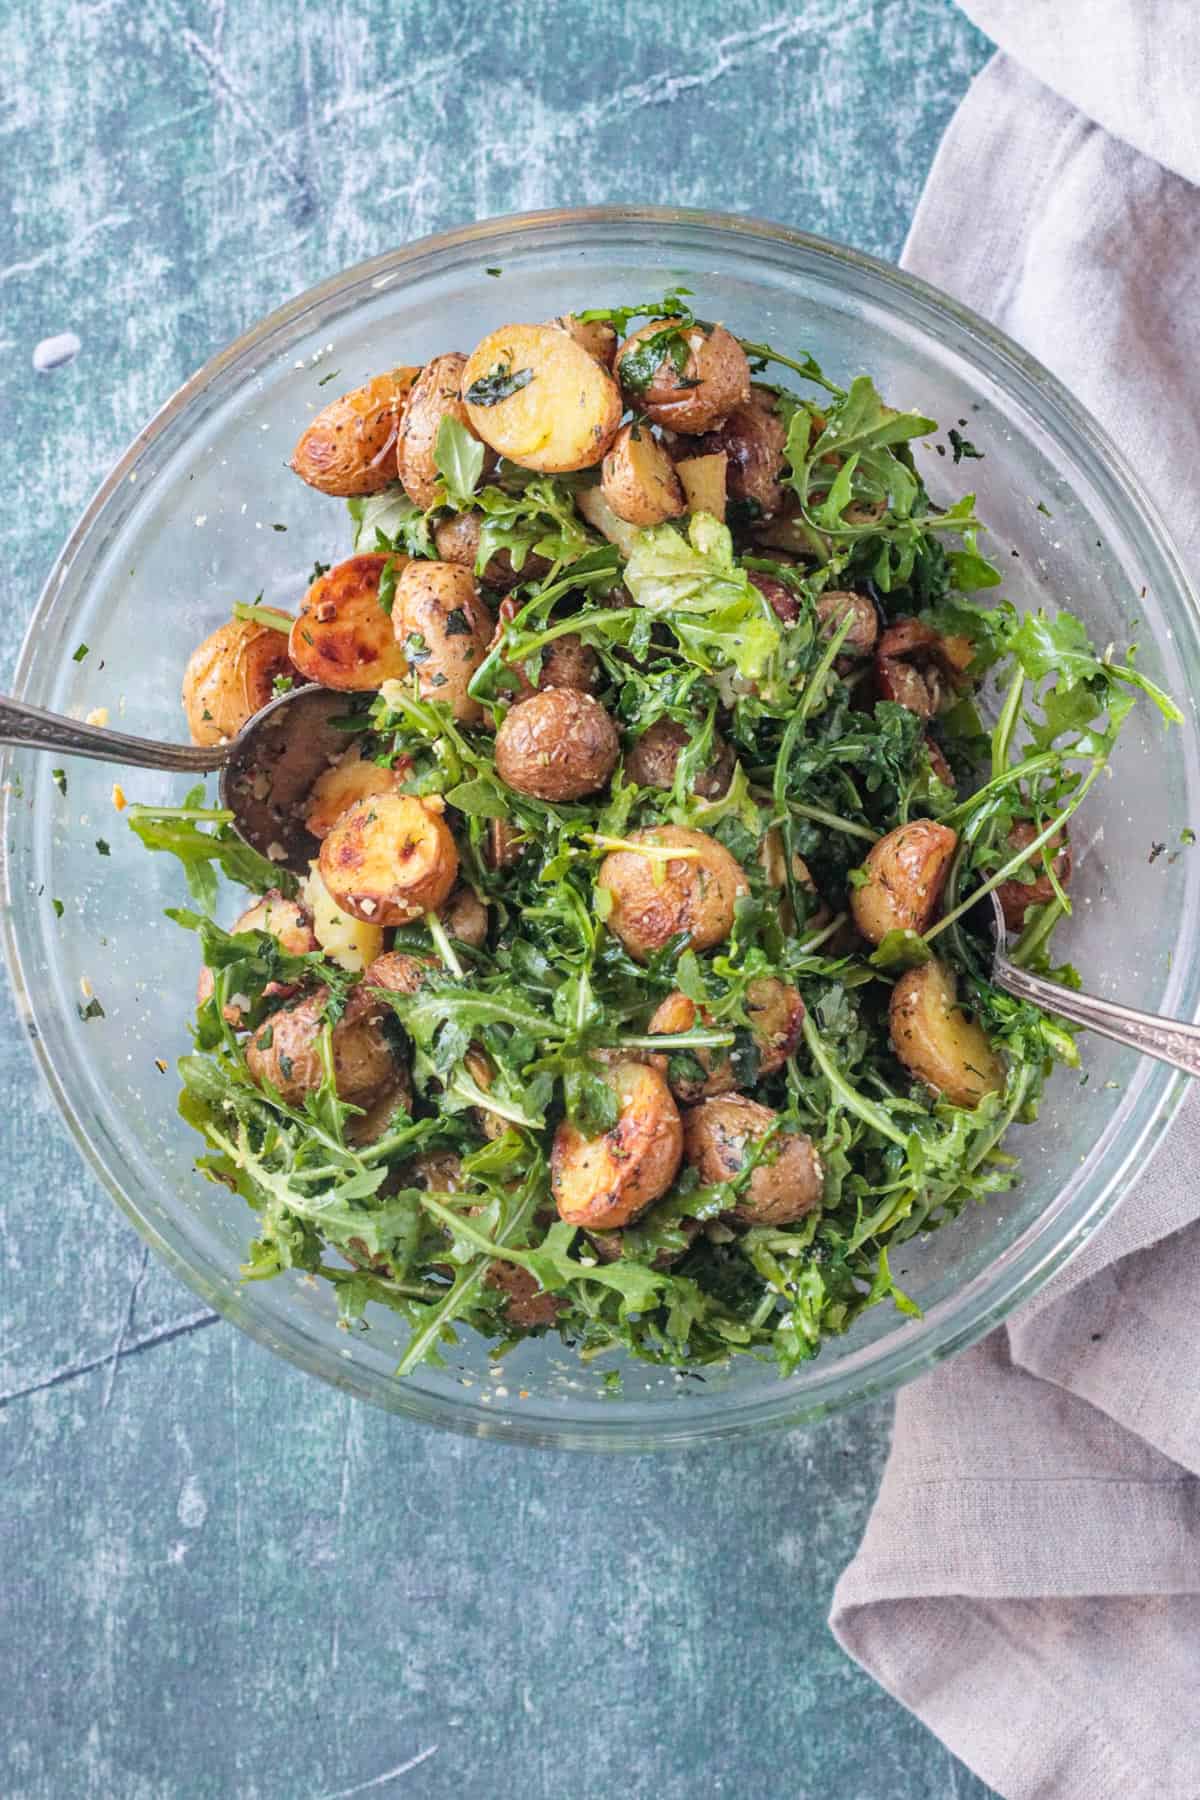 Arugula salad with herb roasted potatoes and vegan parmesan cheese tossed together.